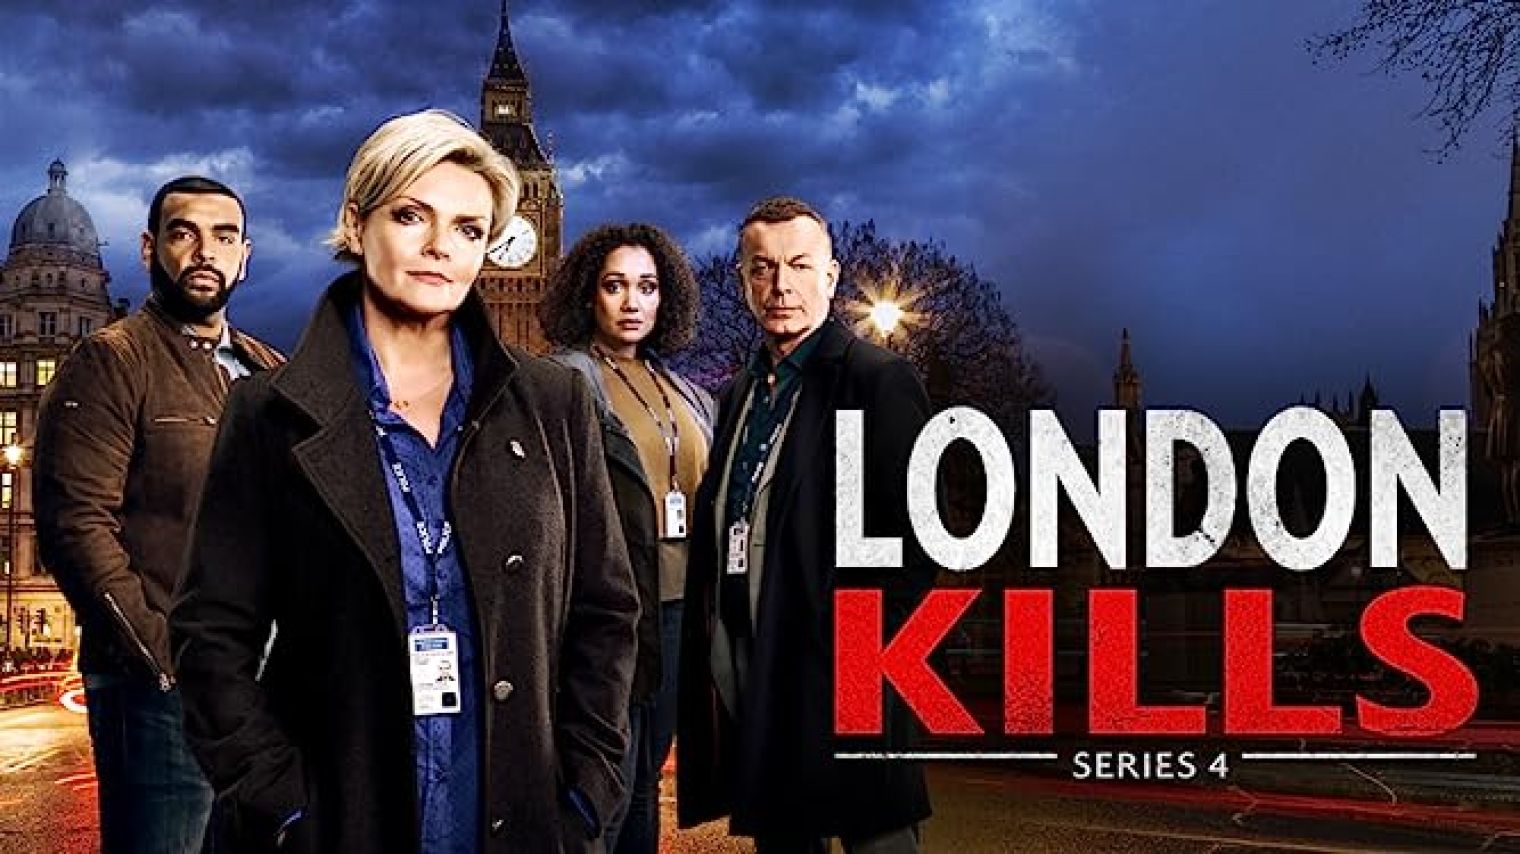 Sharon Small returns to her starring role as DS Vivienne Cole in series 4 of ‘London Kills’ which premieres on Acorn TV (via Prime) today